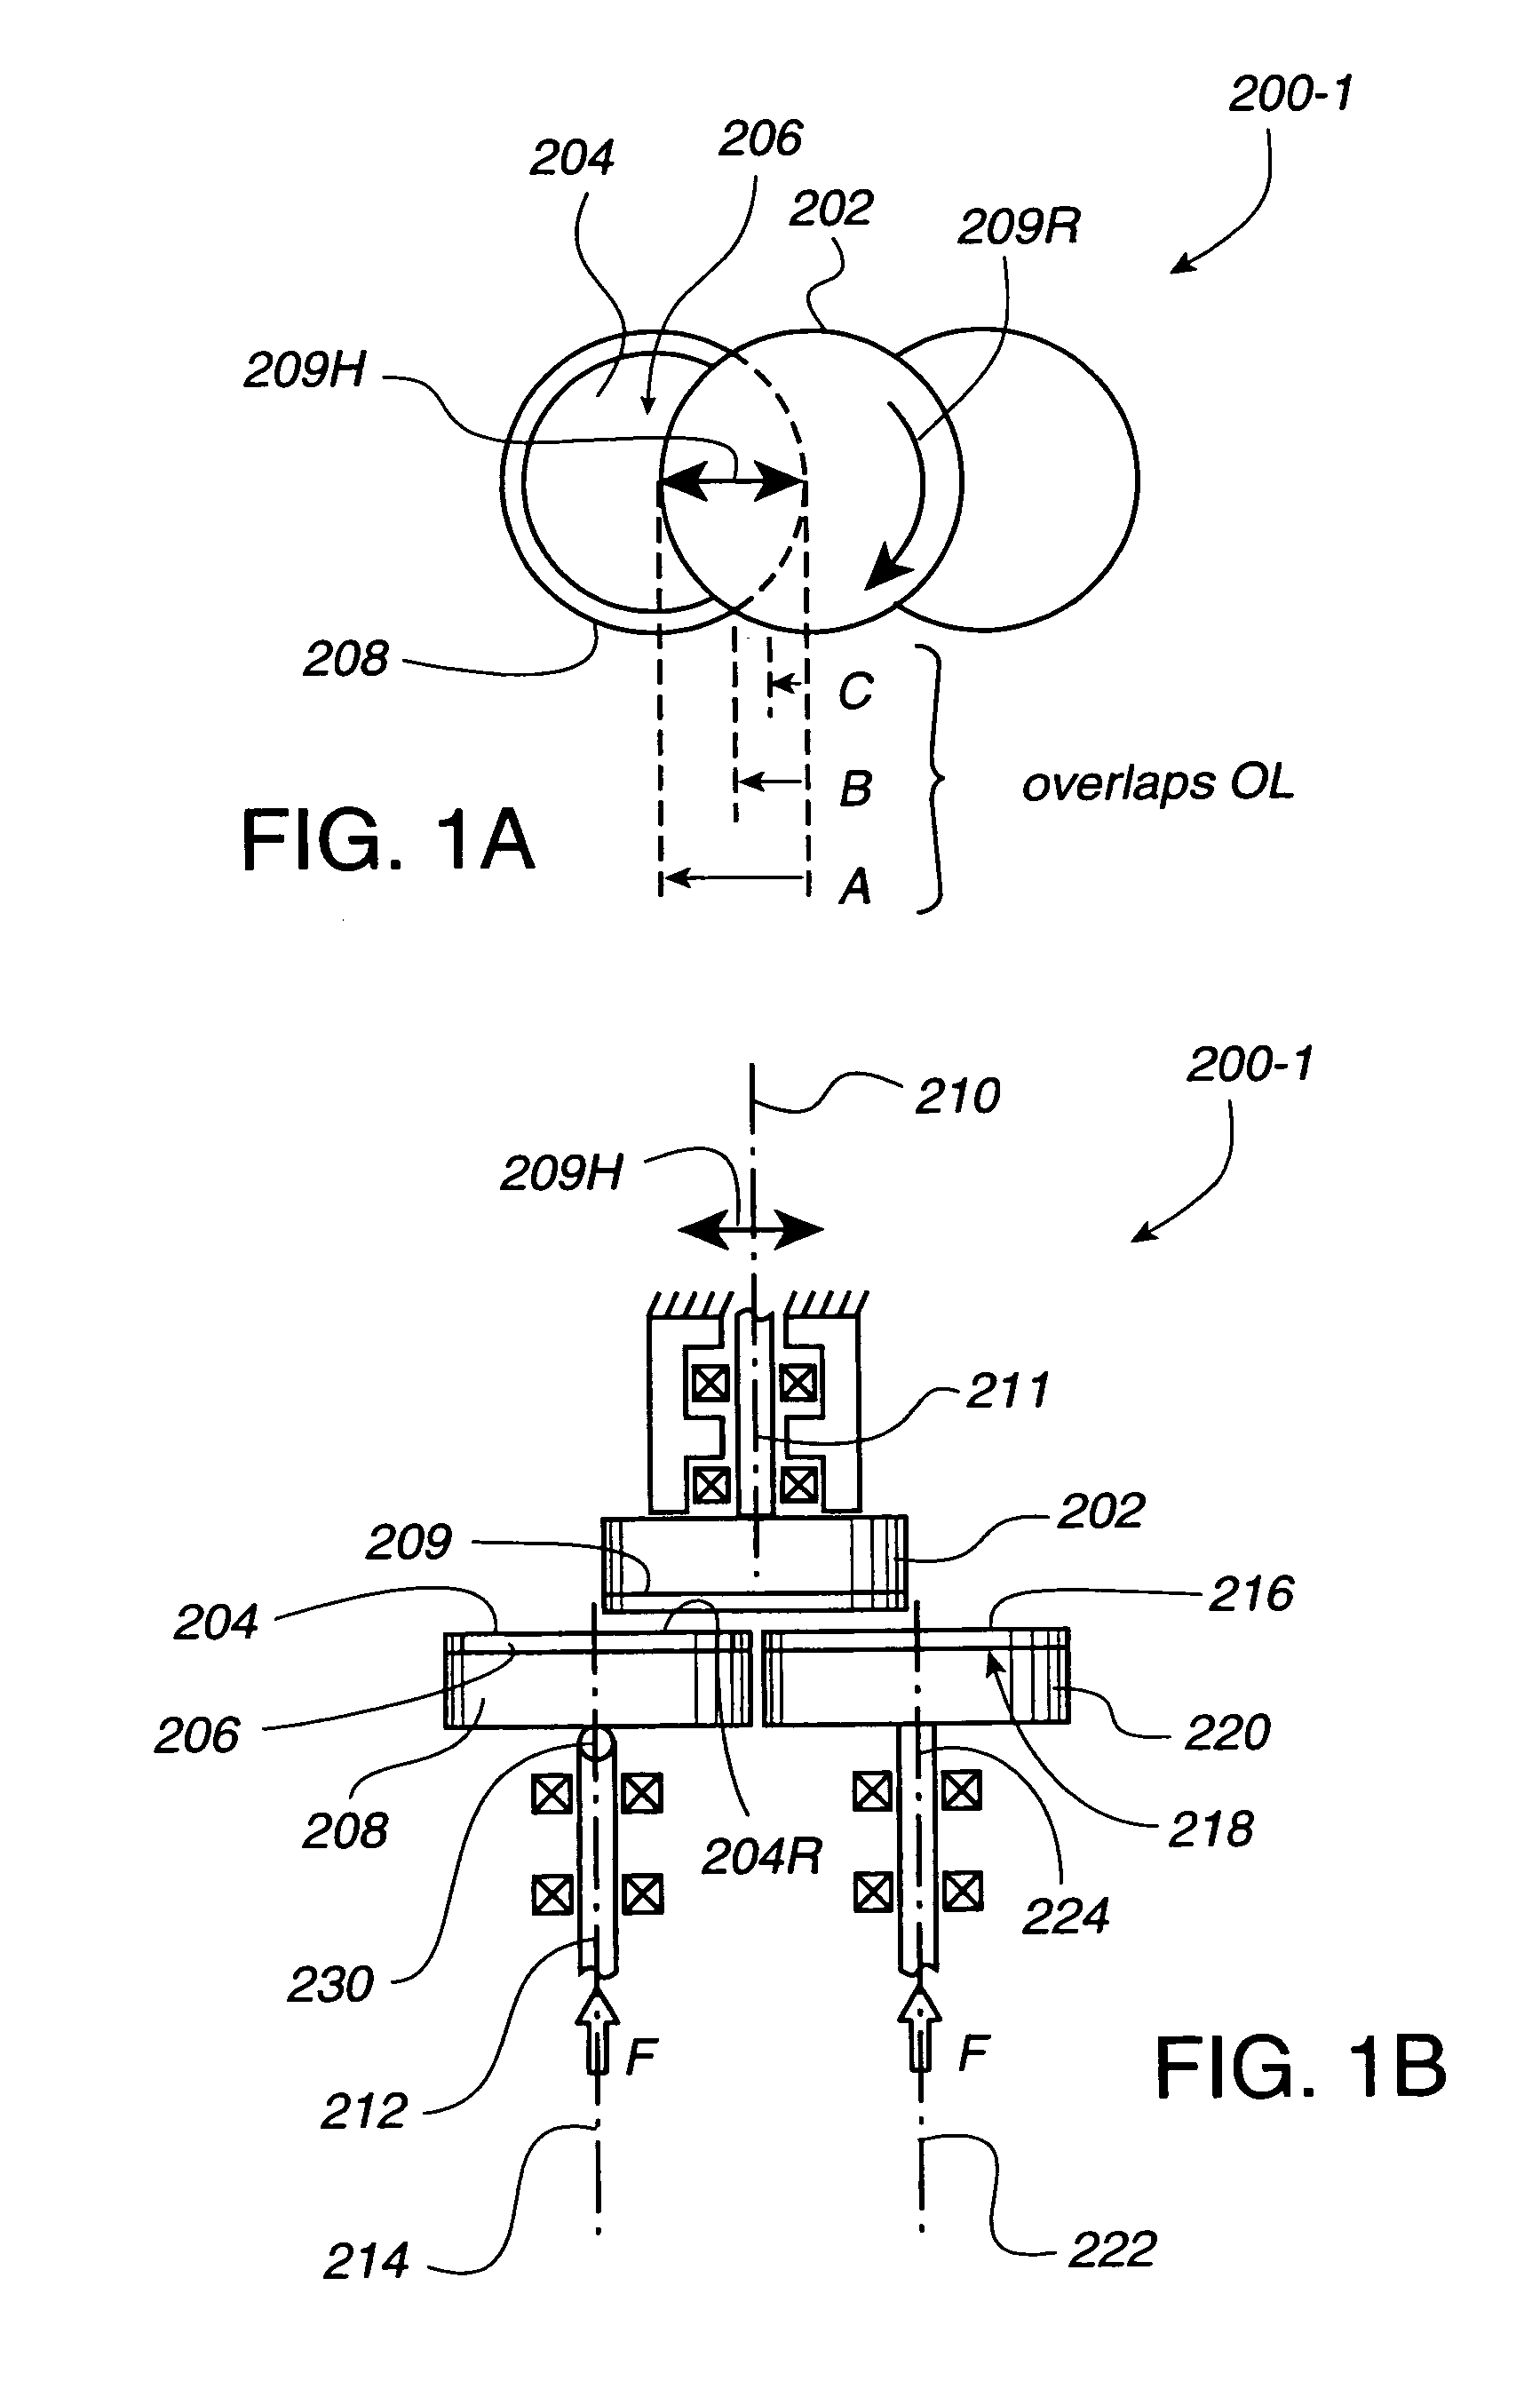 Apparatus for controlling retaining ring and wafer head tilt for chemical mechanical polishing